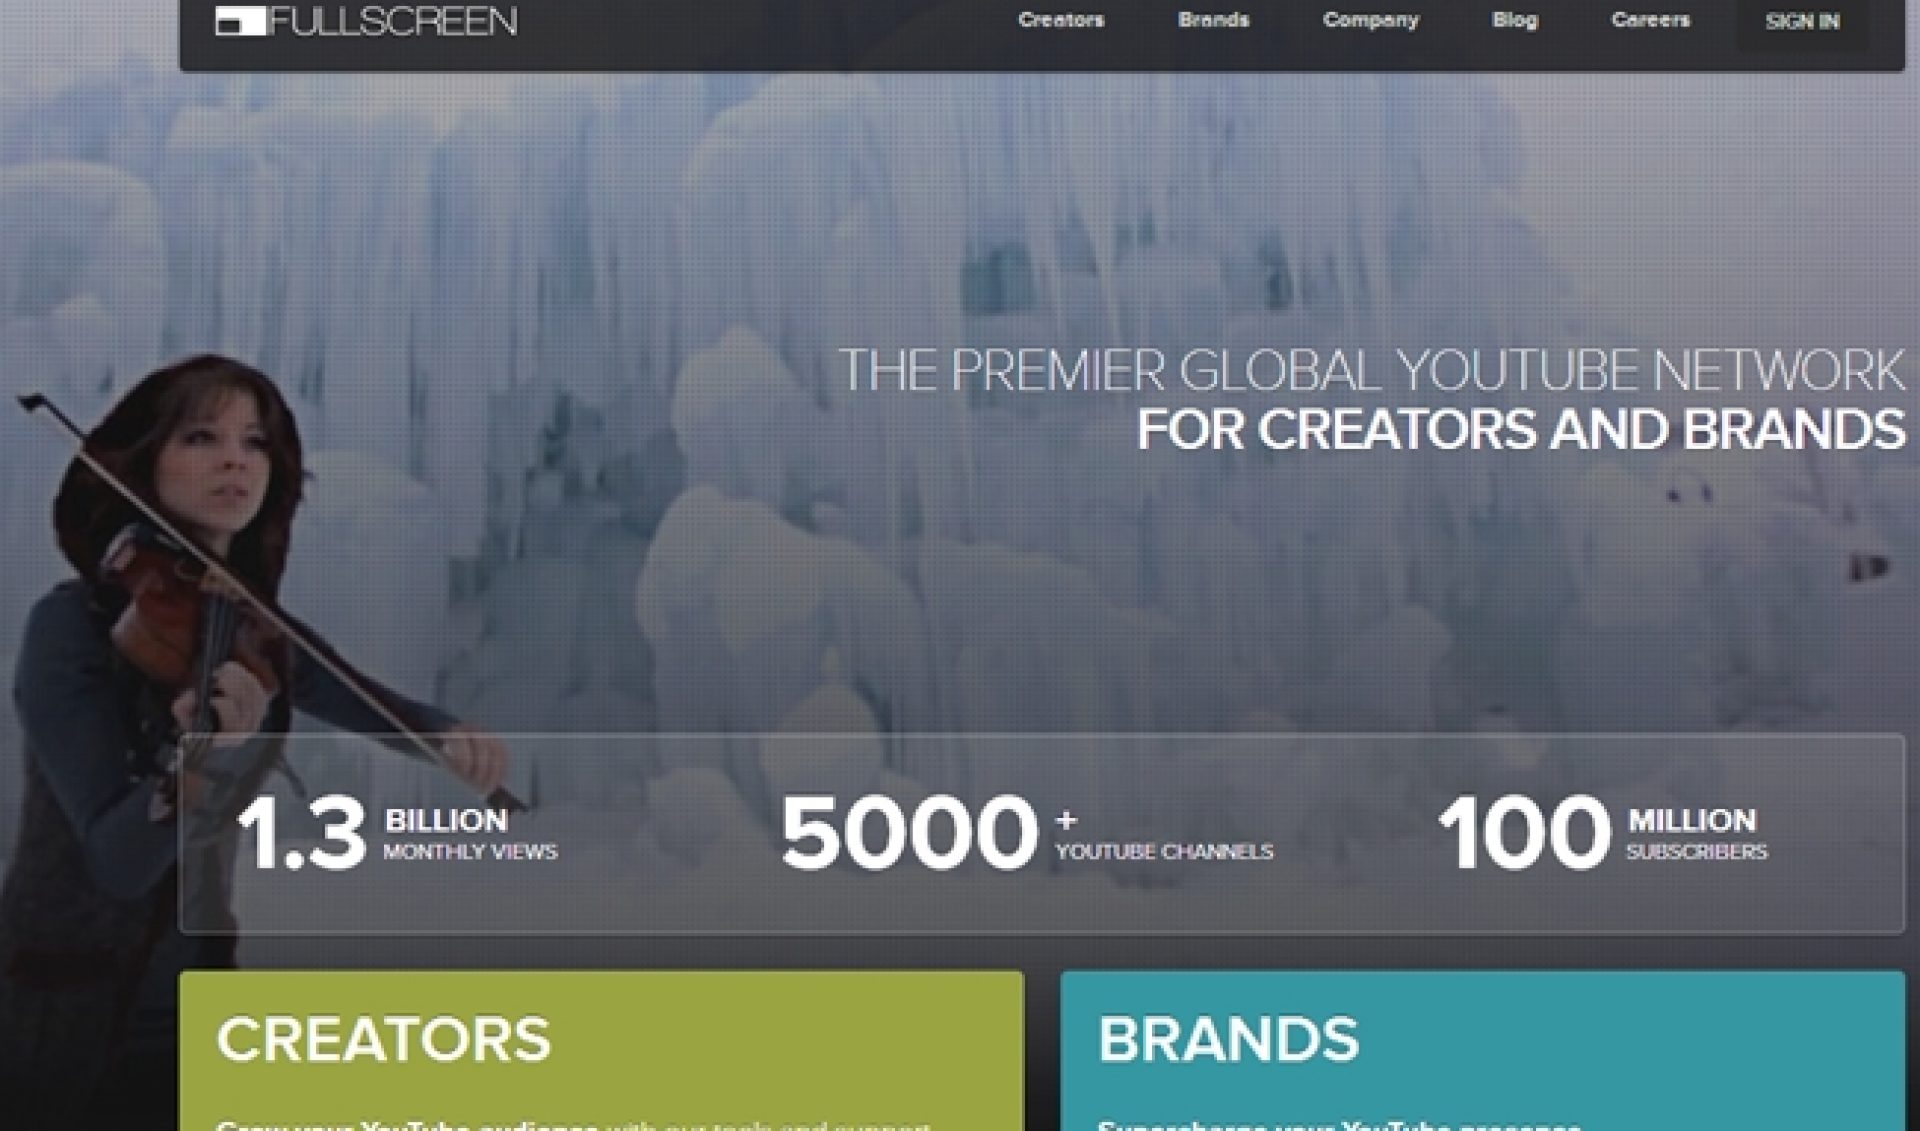 Fullscreen To Spend A Cool Million On Marketing For Smaller Channels